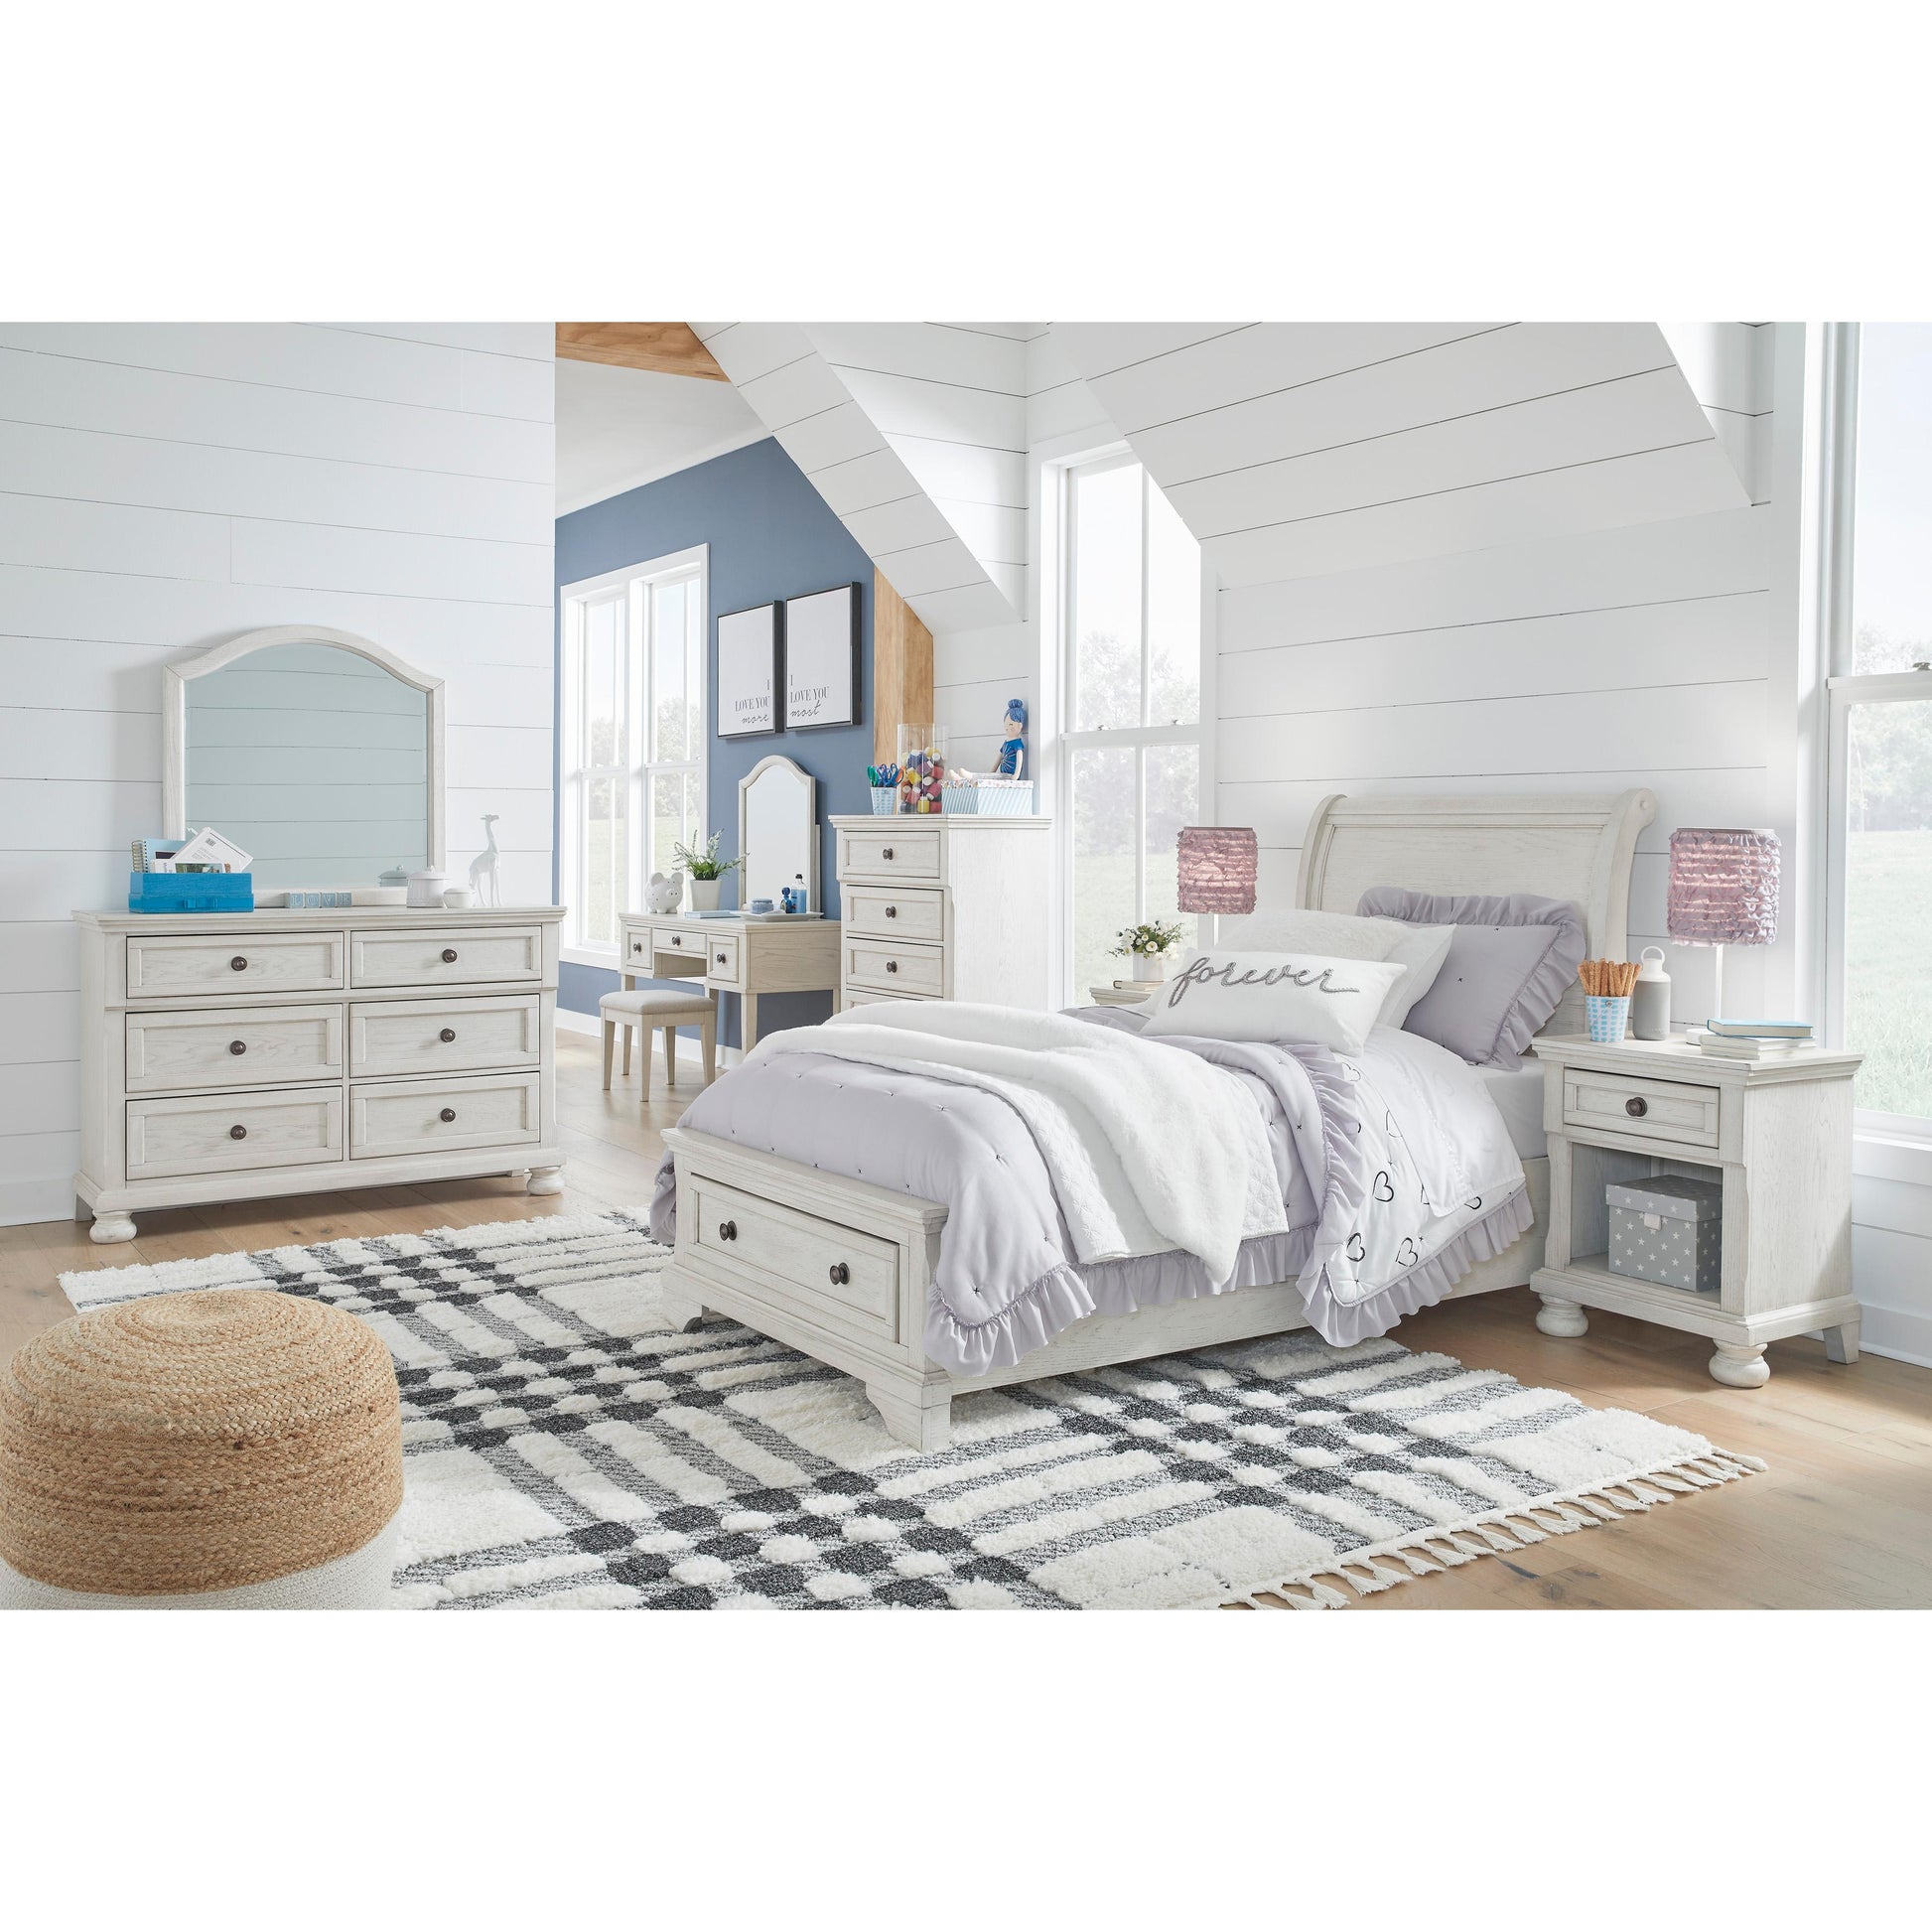 Signature Design by Ashley Kids Beds Bed B742-53/B742-52S/B742-183 IMAGE 8